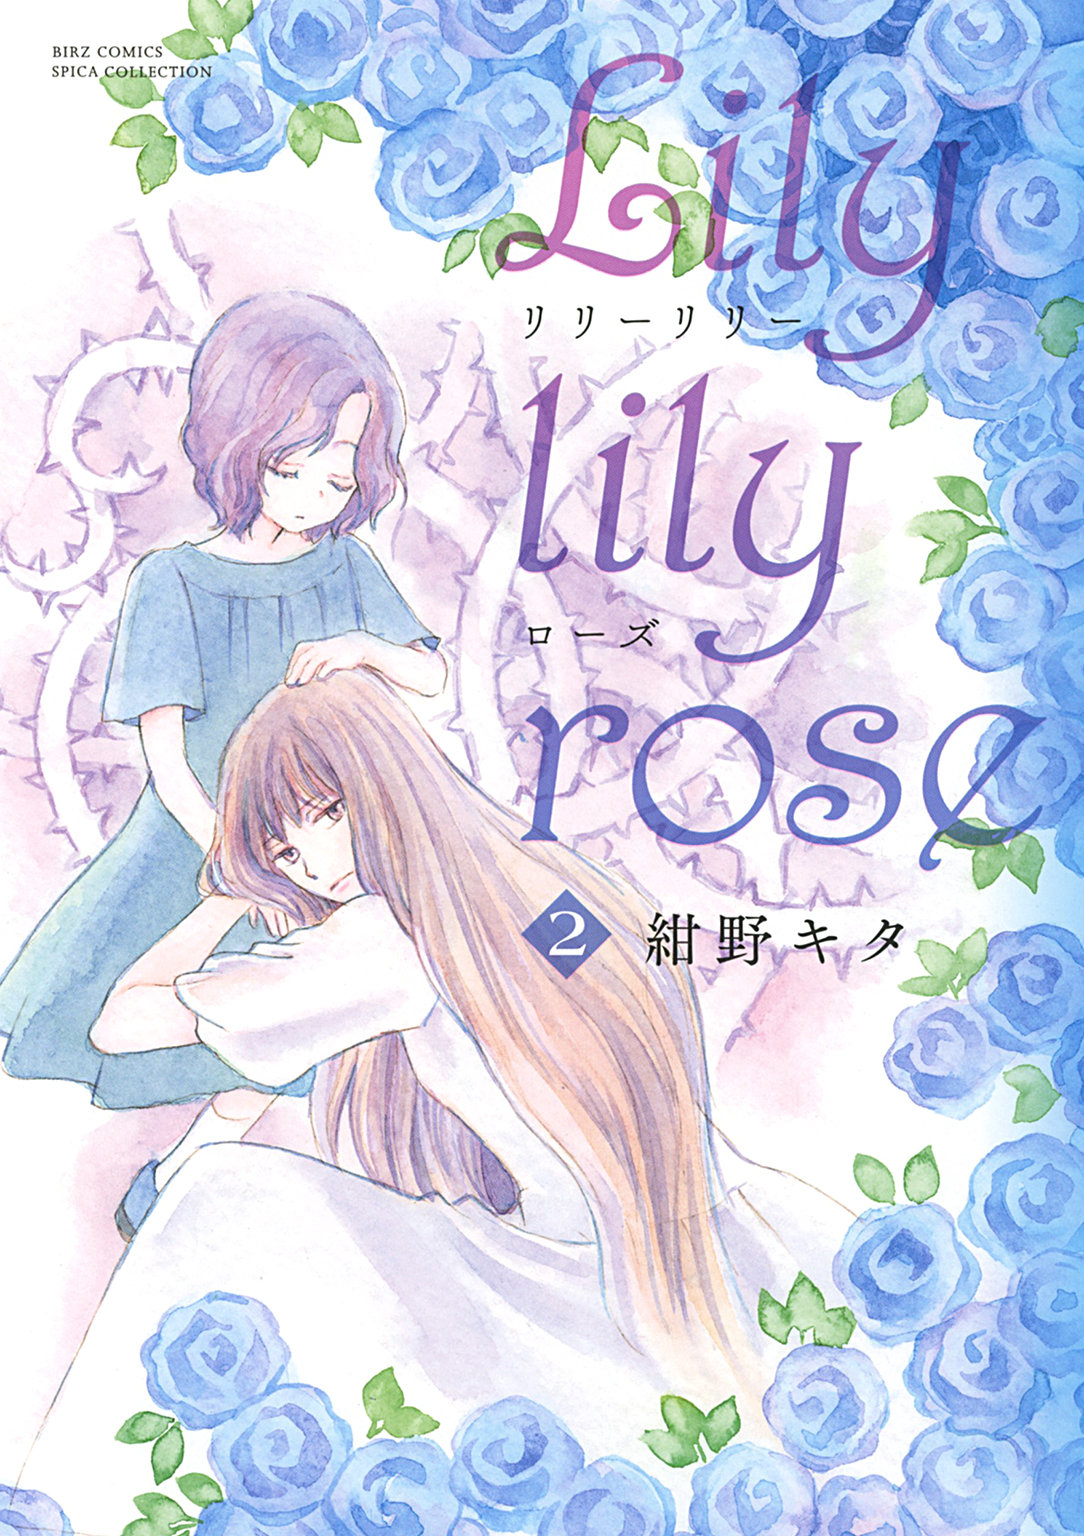 Lily lily rose (2)（最新刊） - 紺野キタ - 漫画・ラノベ（小説 ...